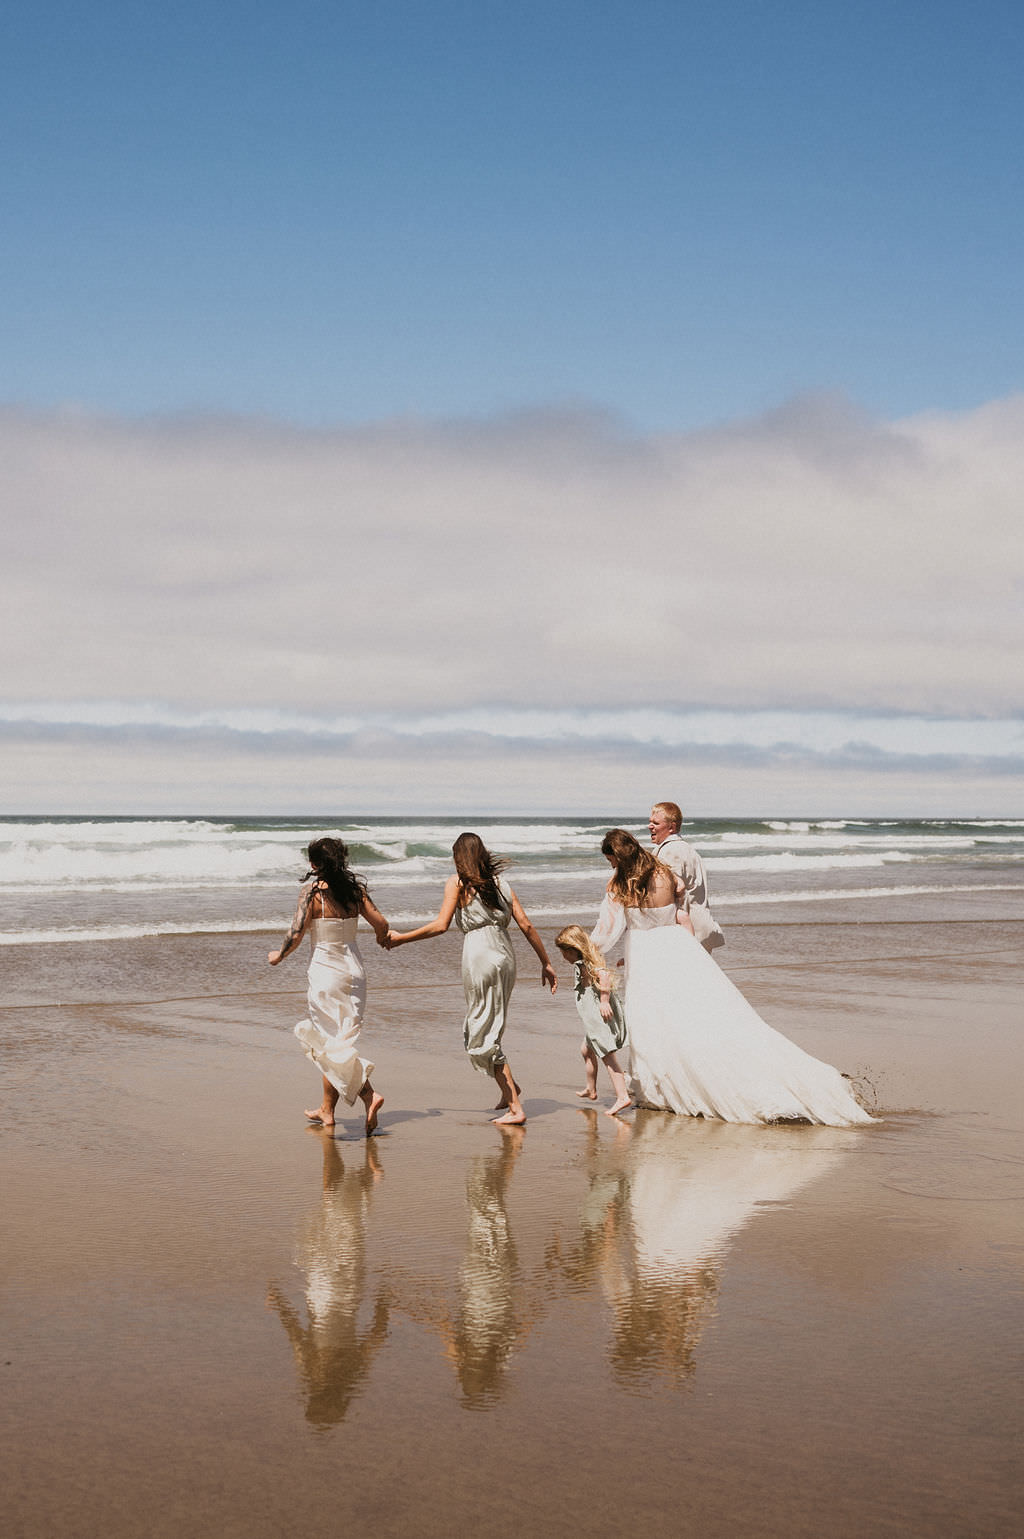 Celebrating their elopement by going into the water with their family.